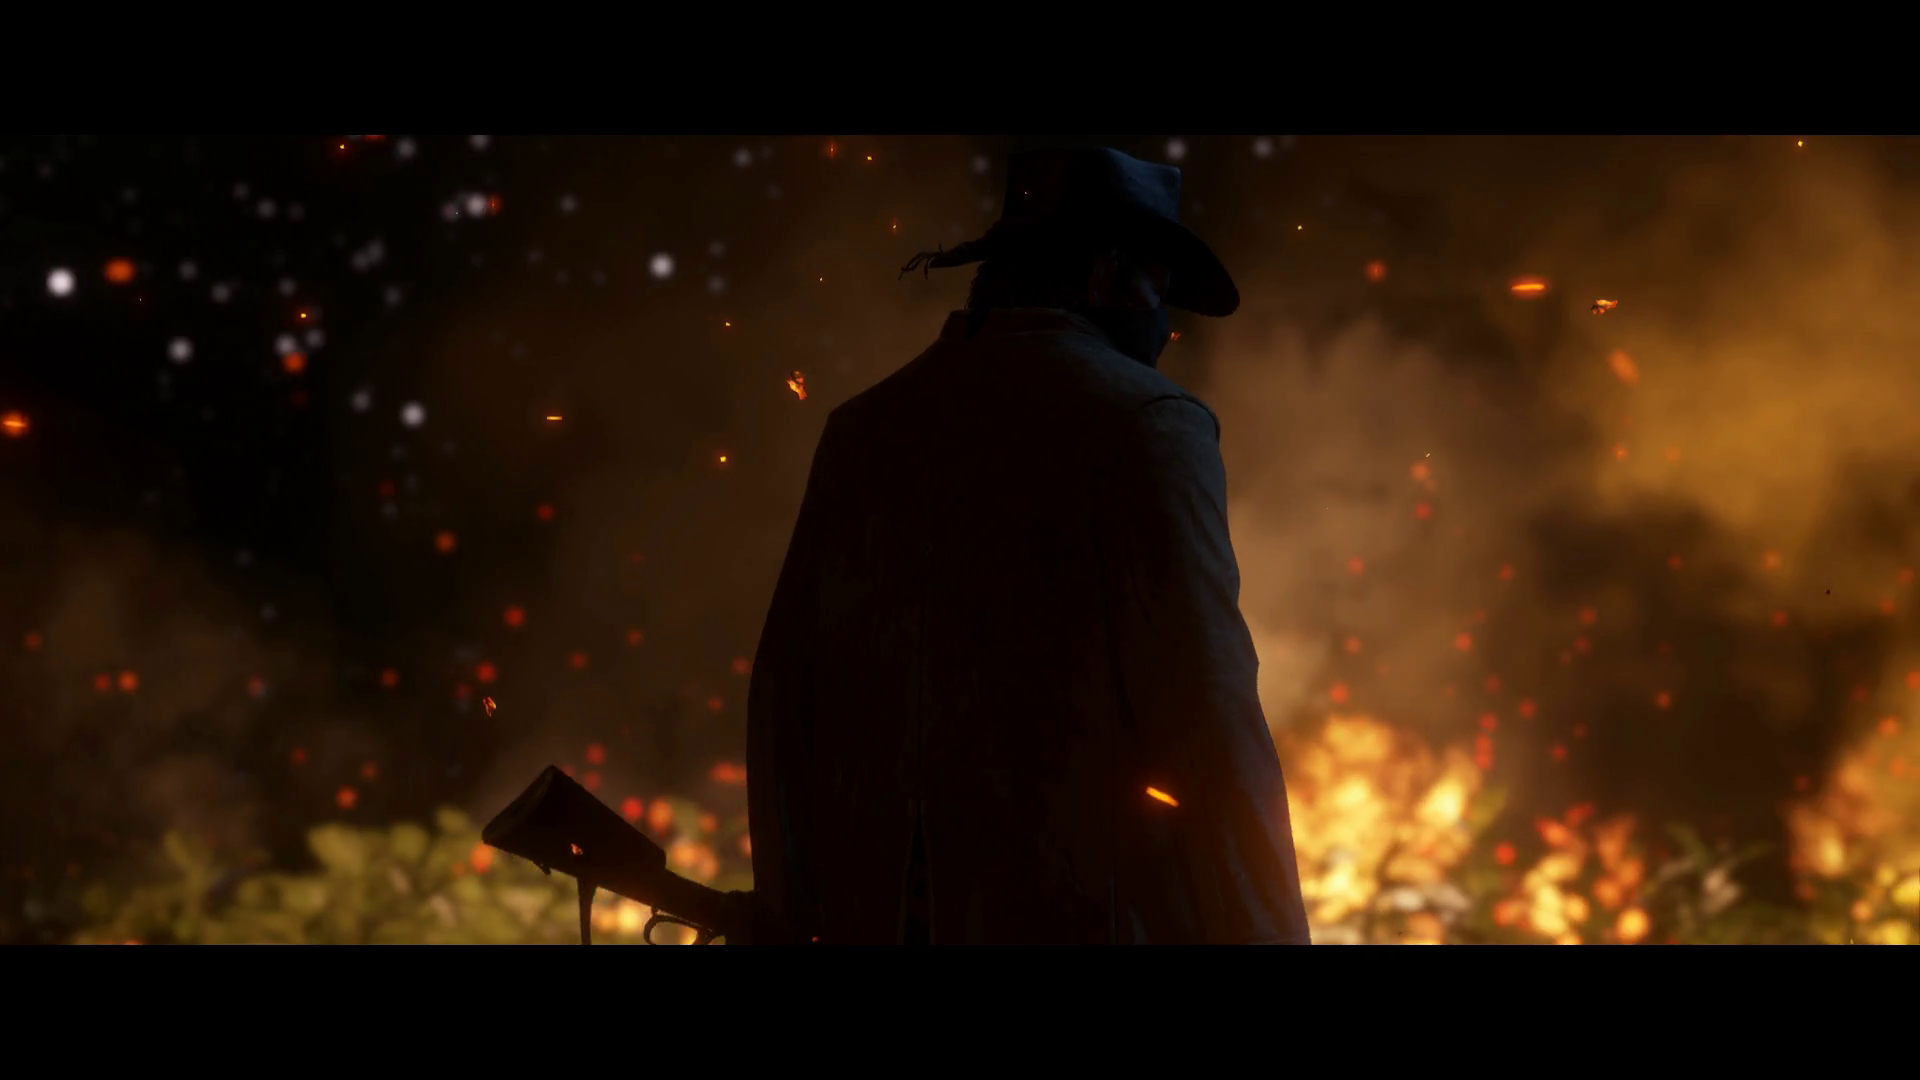 http://www.rdrvision.com/images/content/red-dead-redemption-2/trailer_1/red-dead-redemption-2_trailer-1_18.png